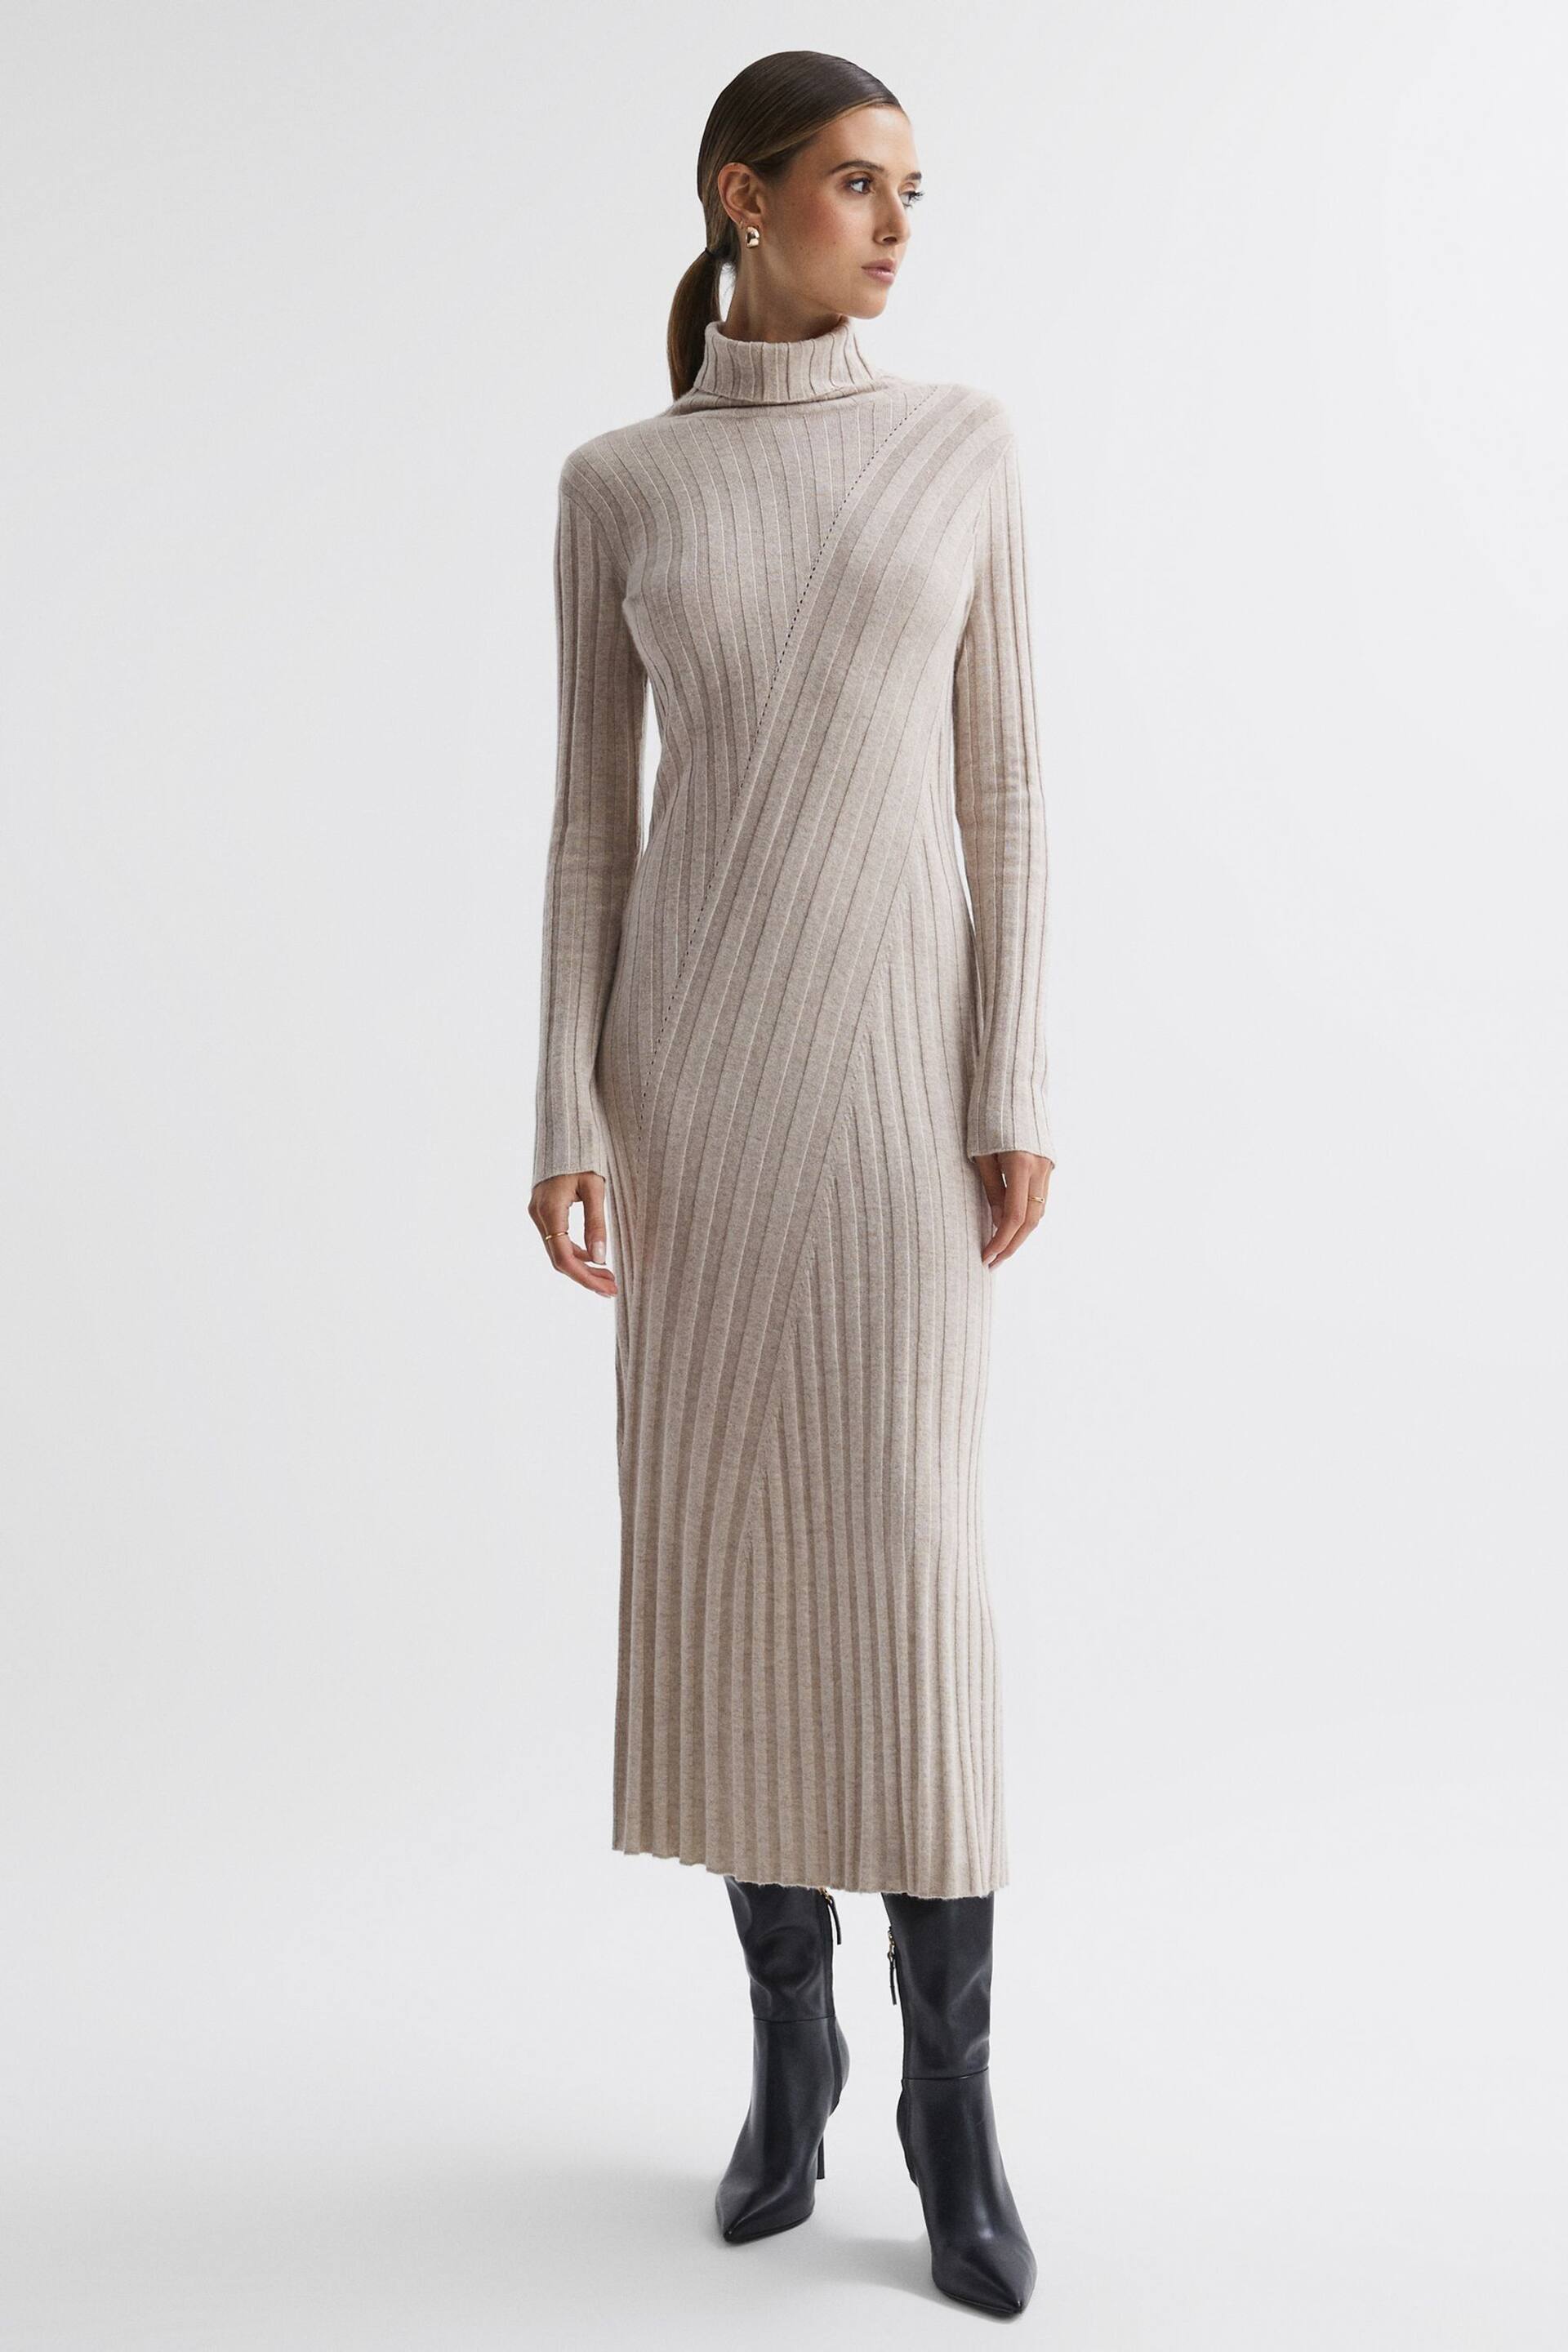 Reiss Neutral Cady Fitted Knitted Midi Dress - Image 1 of 6